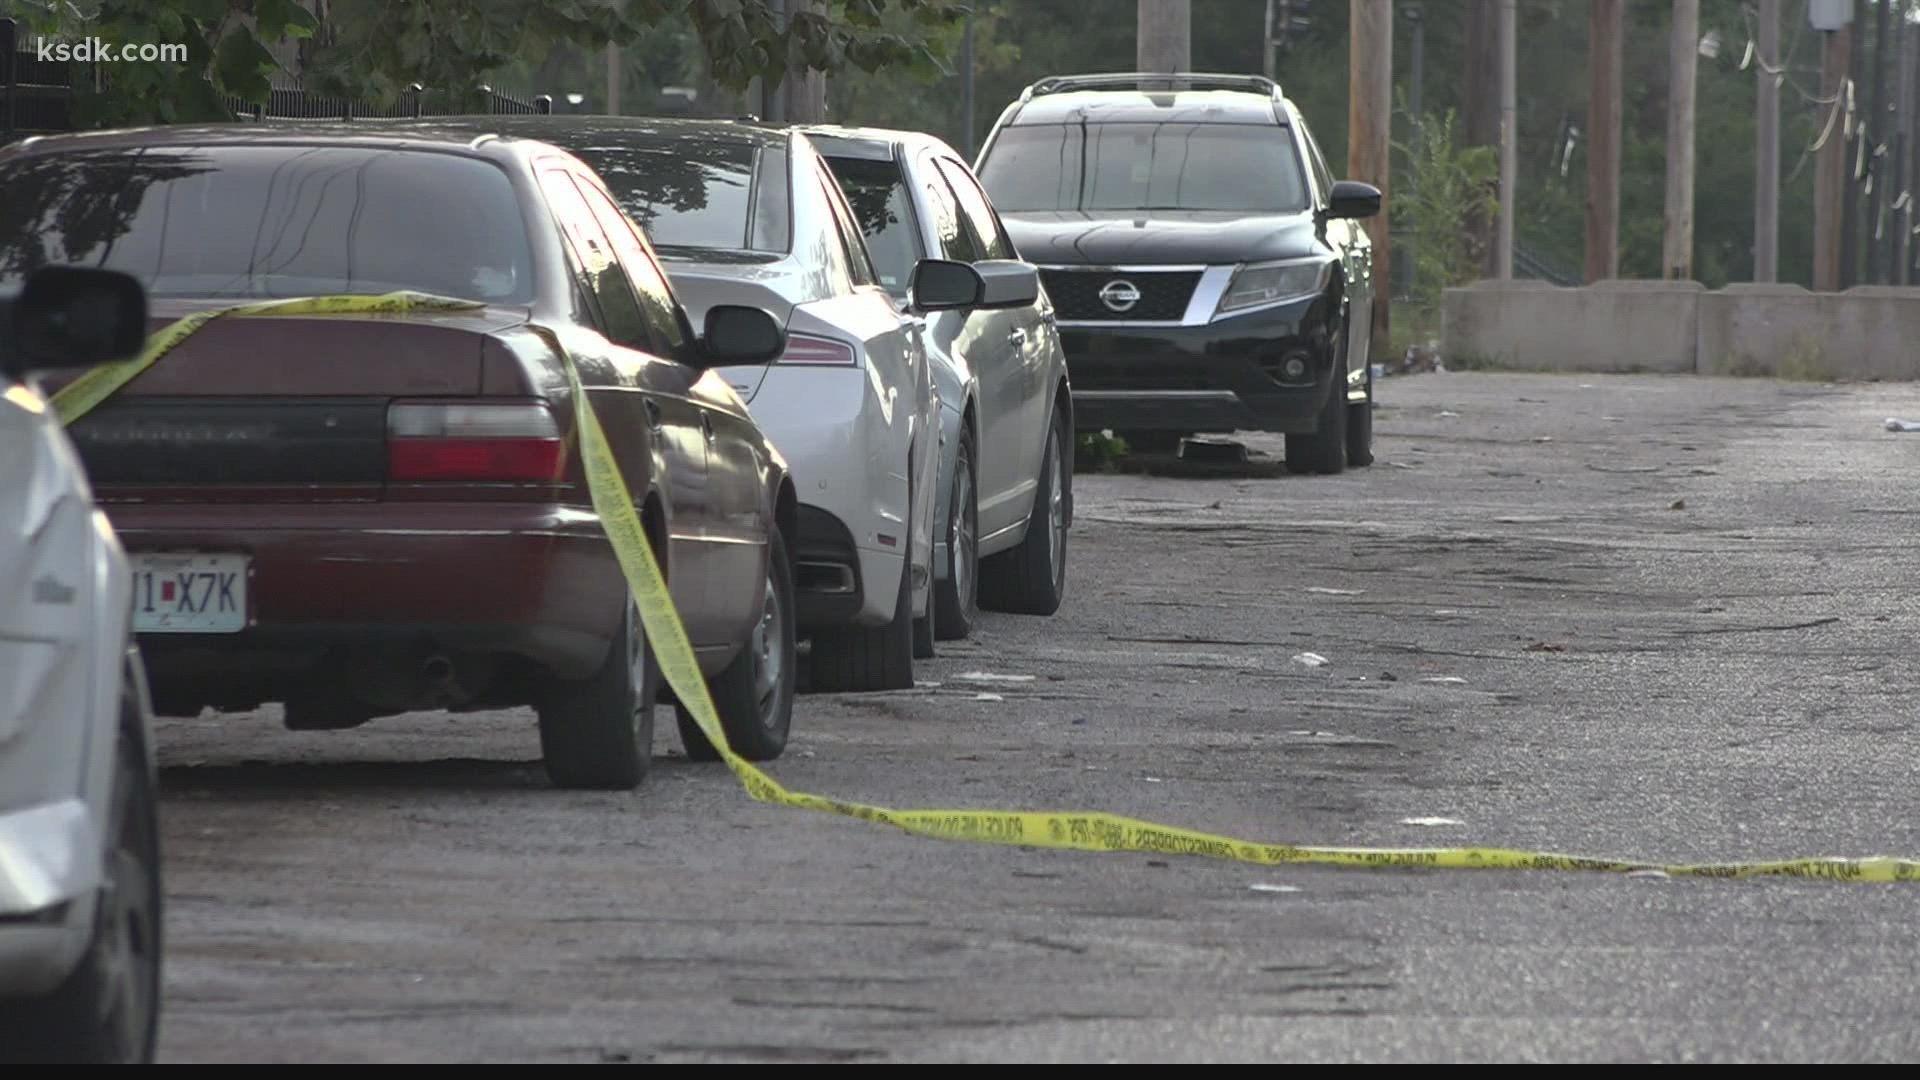 A 19-year-old man was shot in the back of the head in the 700-block of North Euclid.